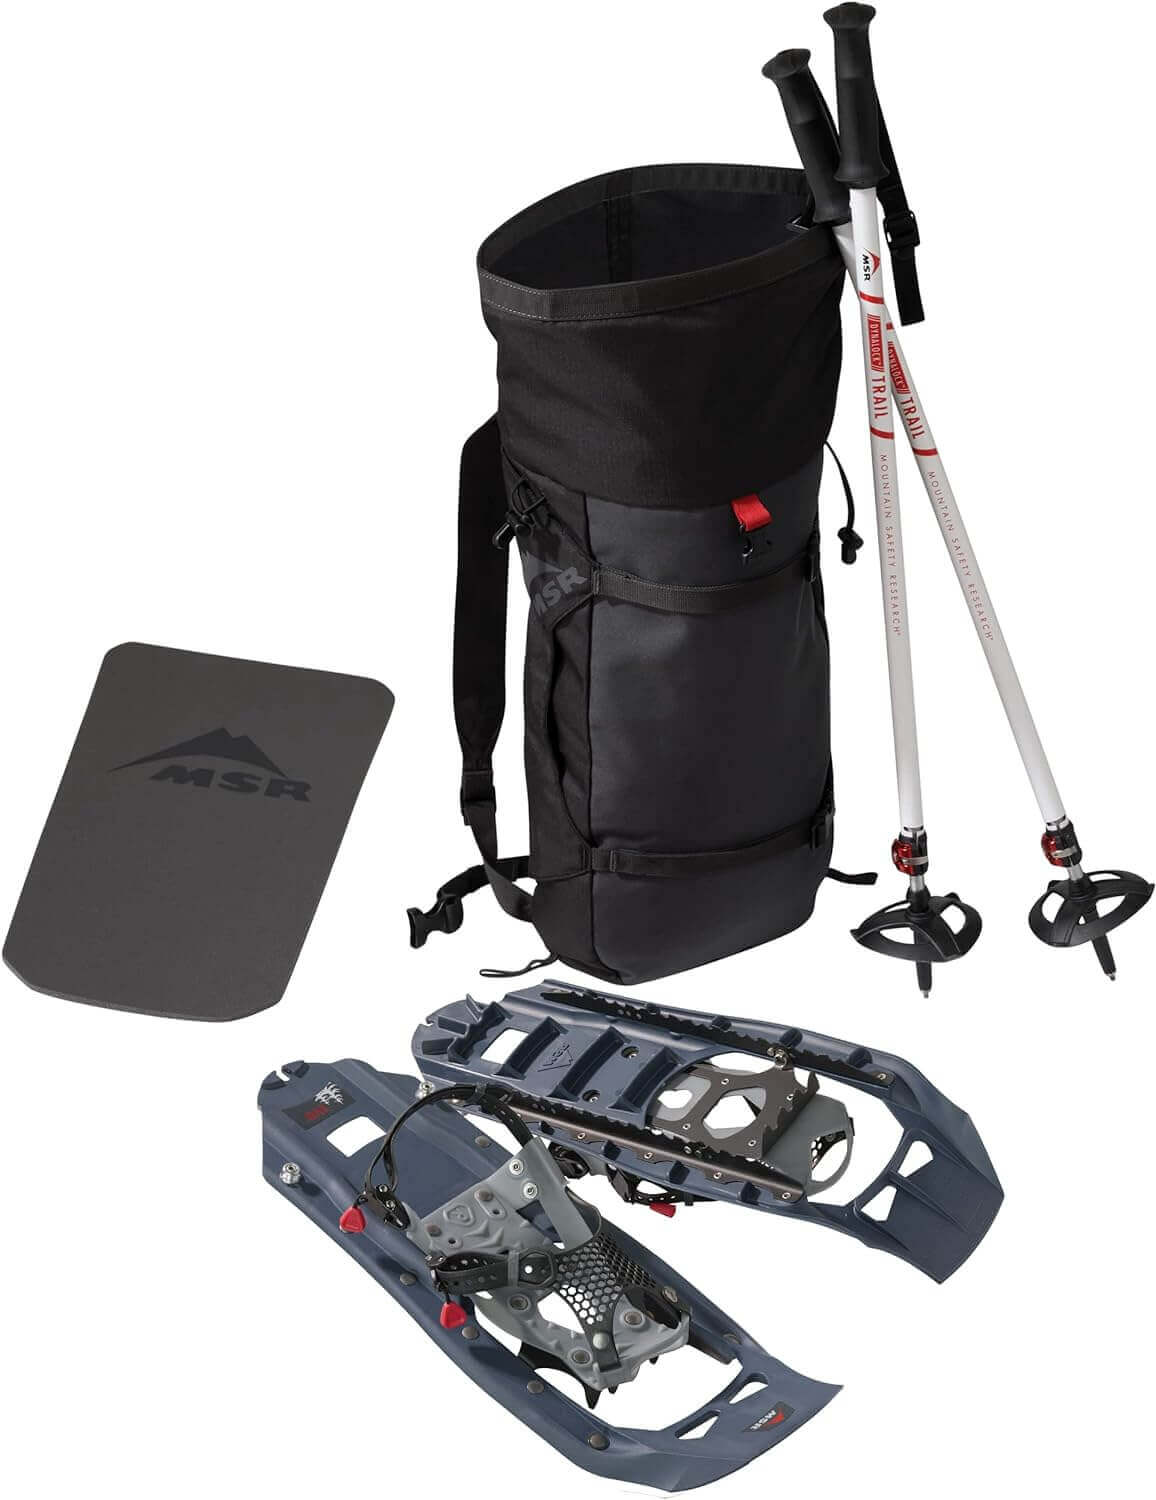 Shop The Latest >MSR Evo Ascent Snowshoe Kit & DynaLock Trail poles > *Only $361.43*> From The Top Brand > *MSRl* > Shop Now and Get Free Shipping On Orders Over $45.00 >*Shop Earth Foot*